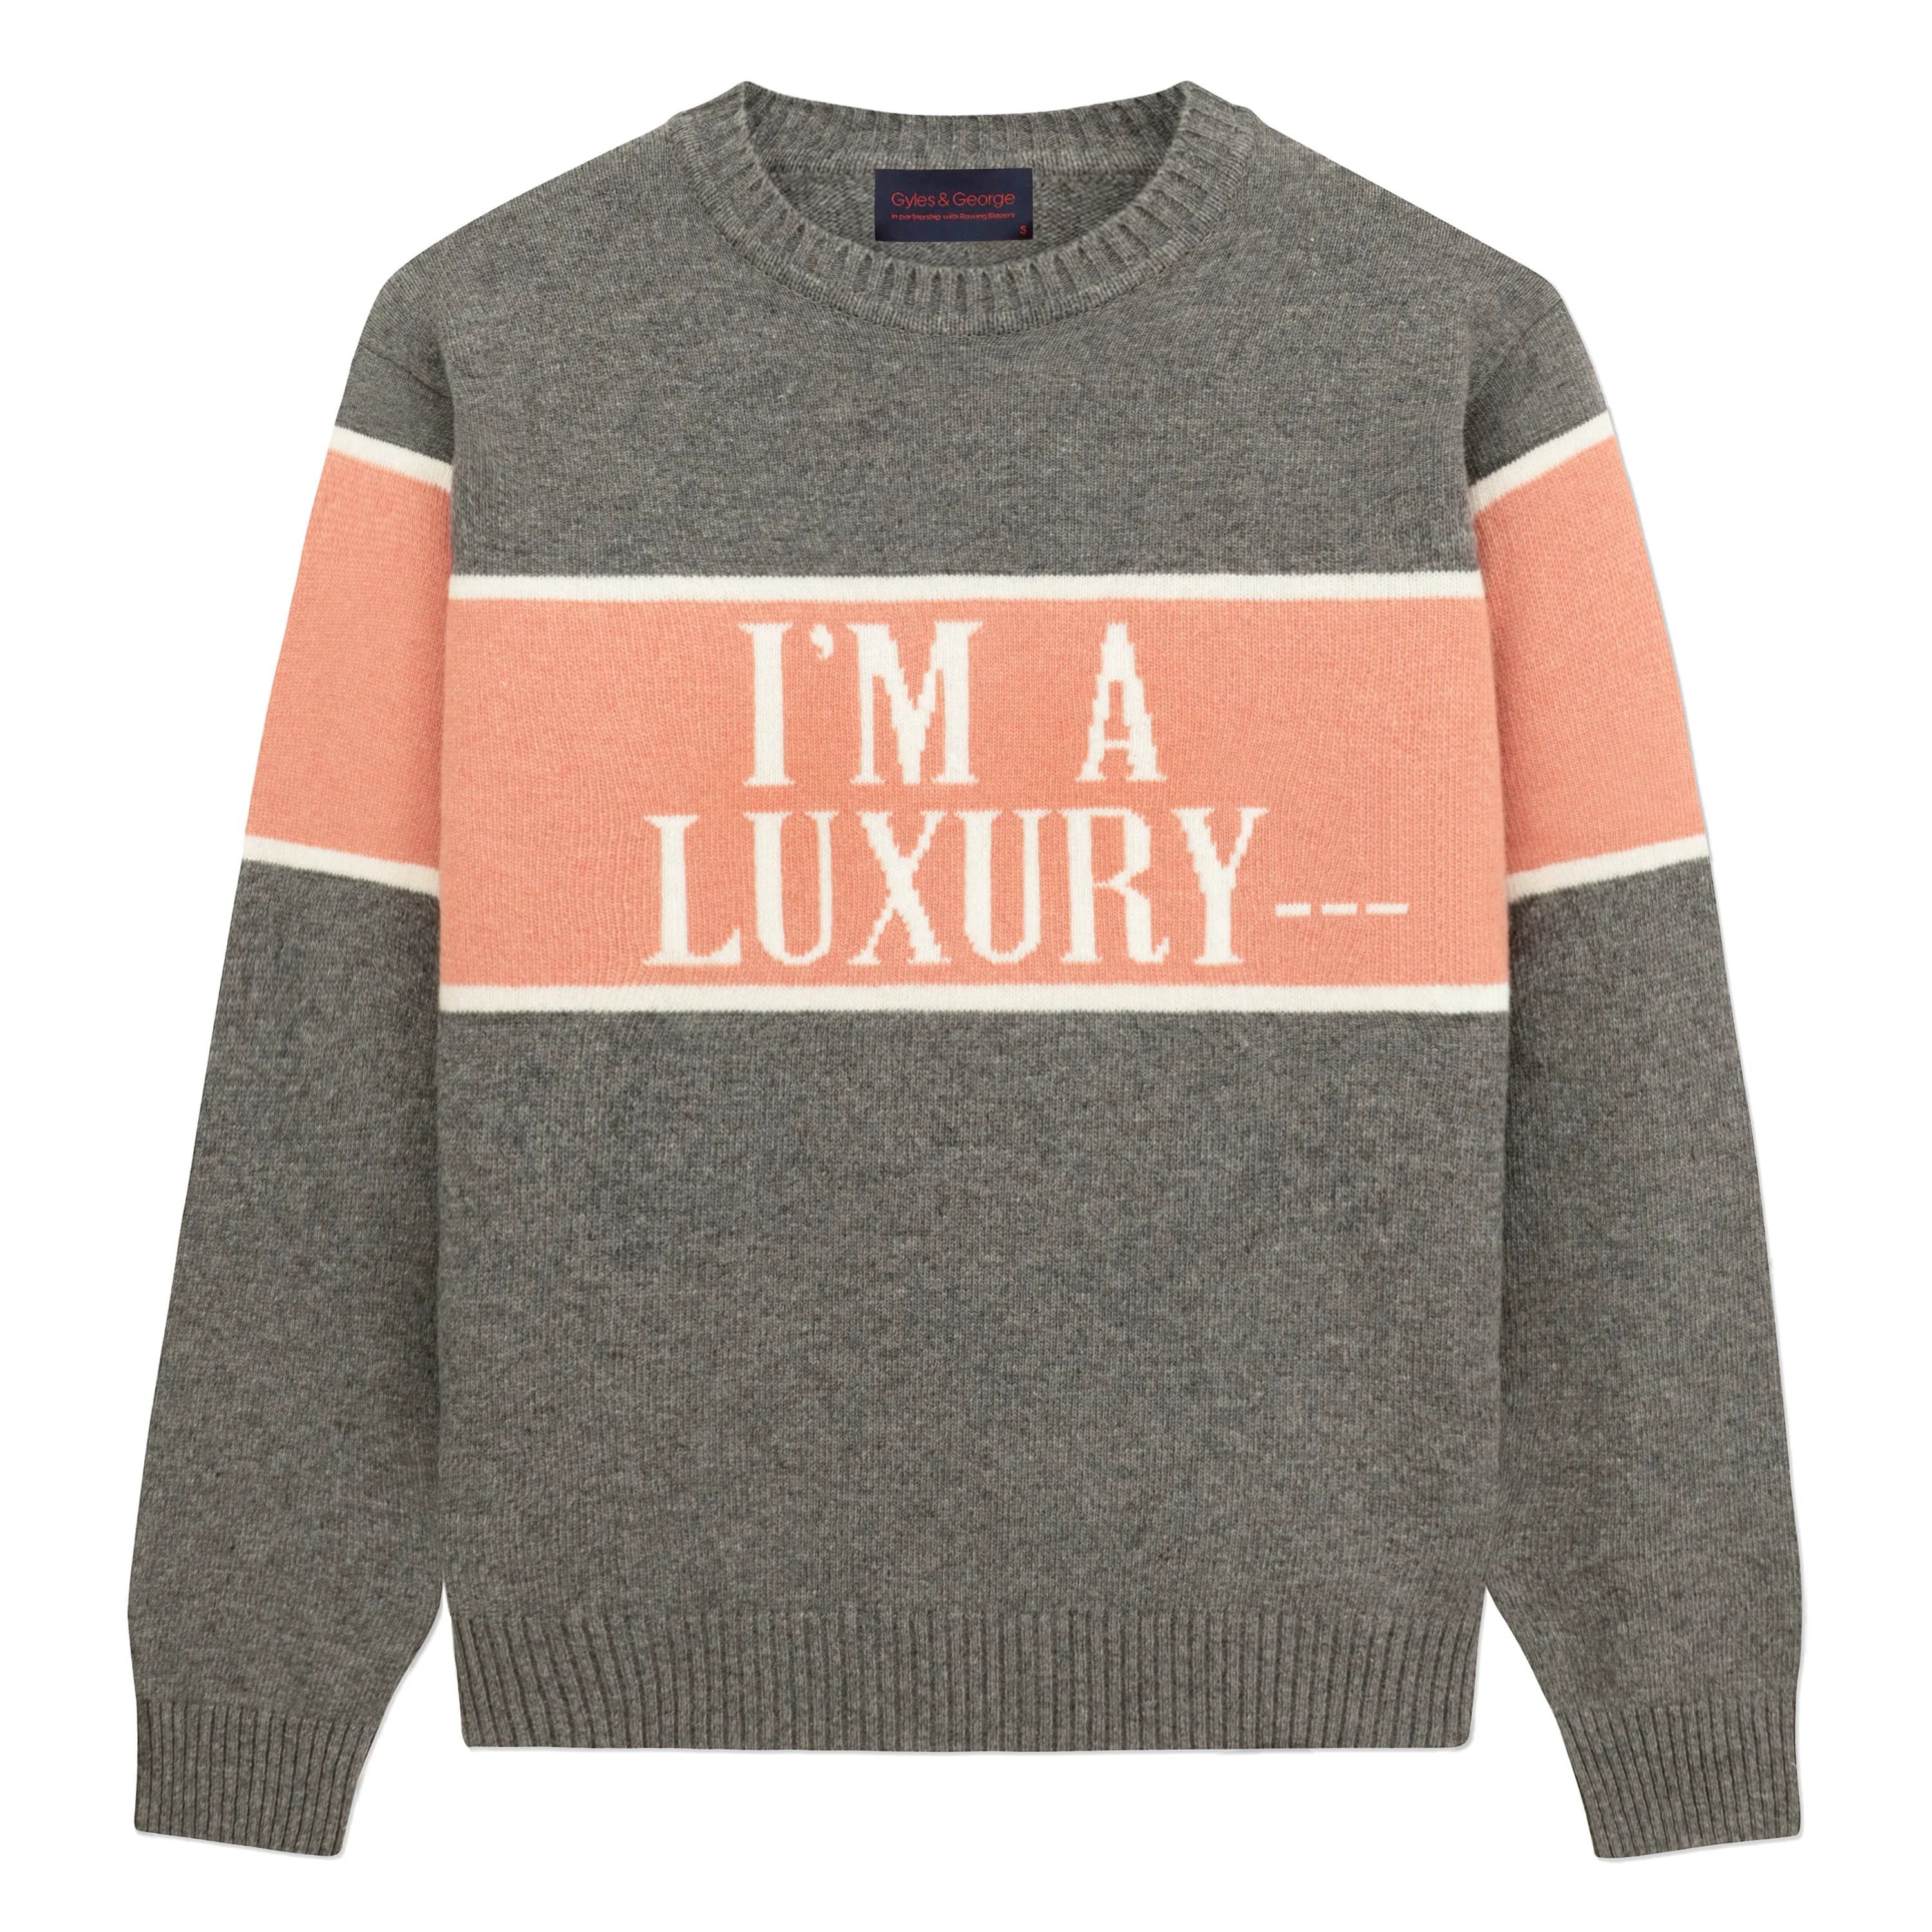 Gyles & George for men "i am a luxury" Sweater